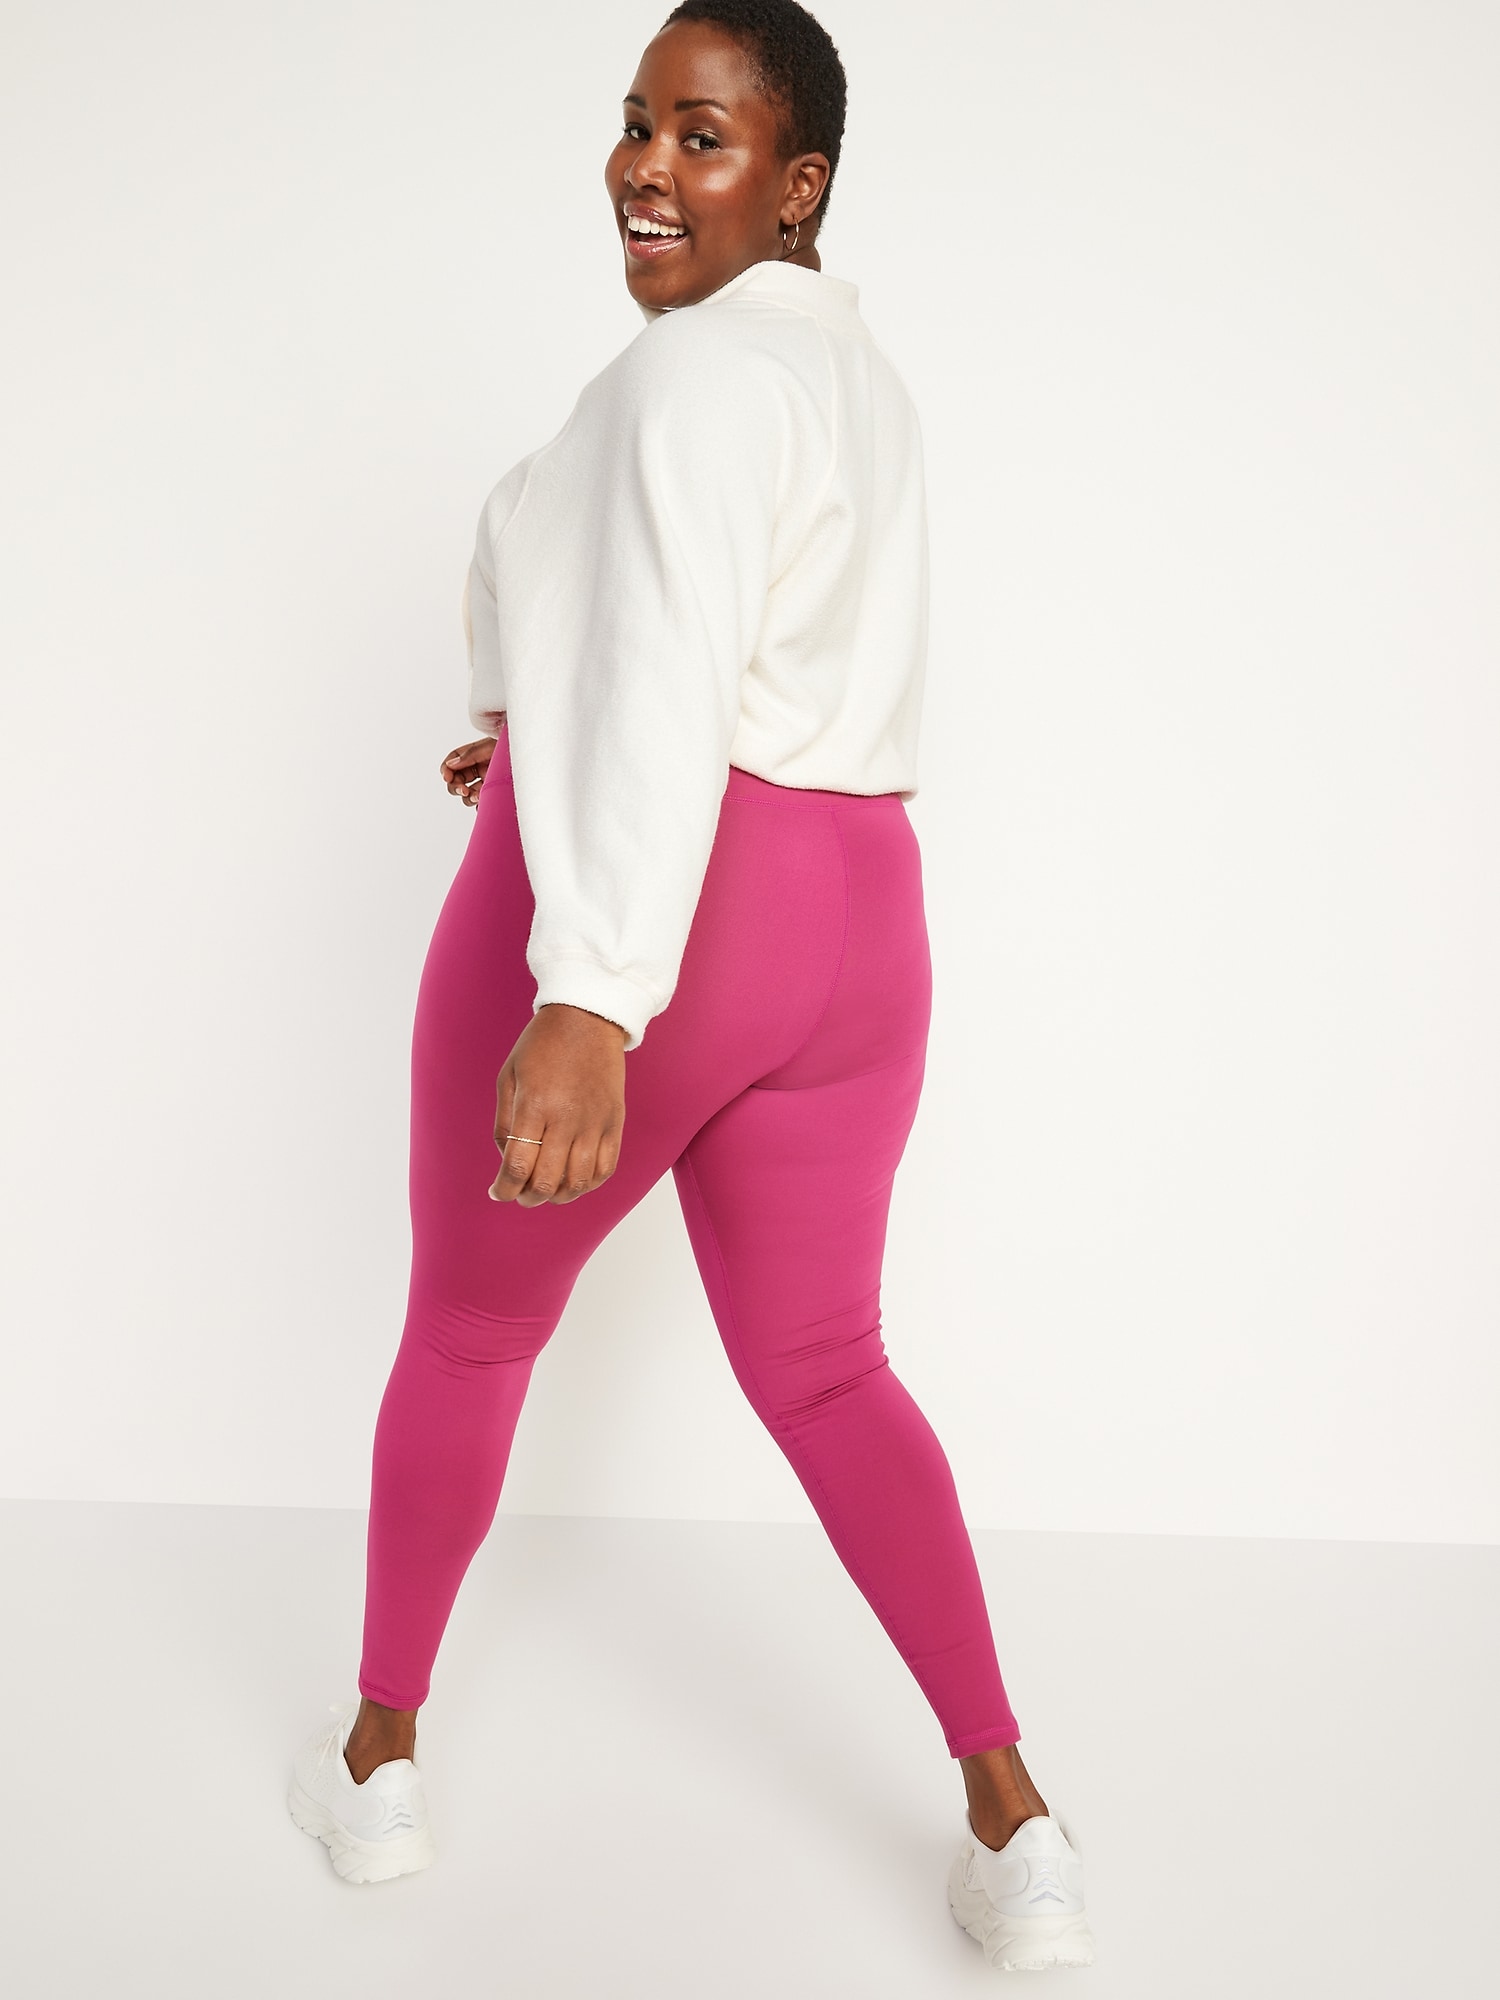 Exceptionally Stylish High Waist Compression Leggings at Low